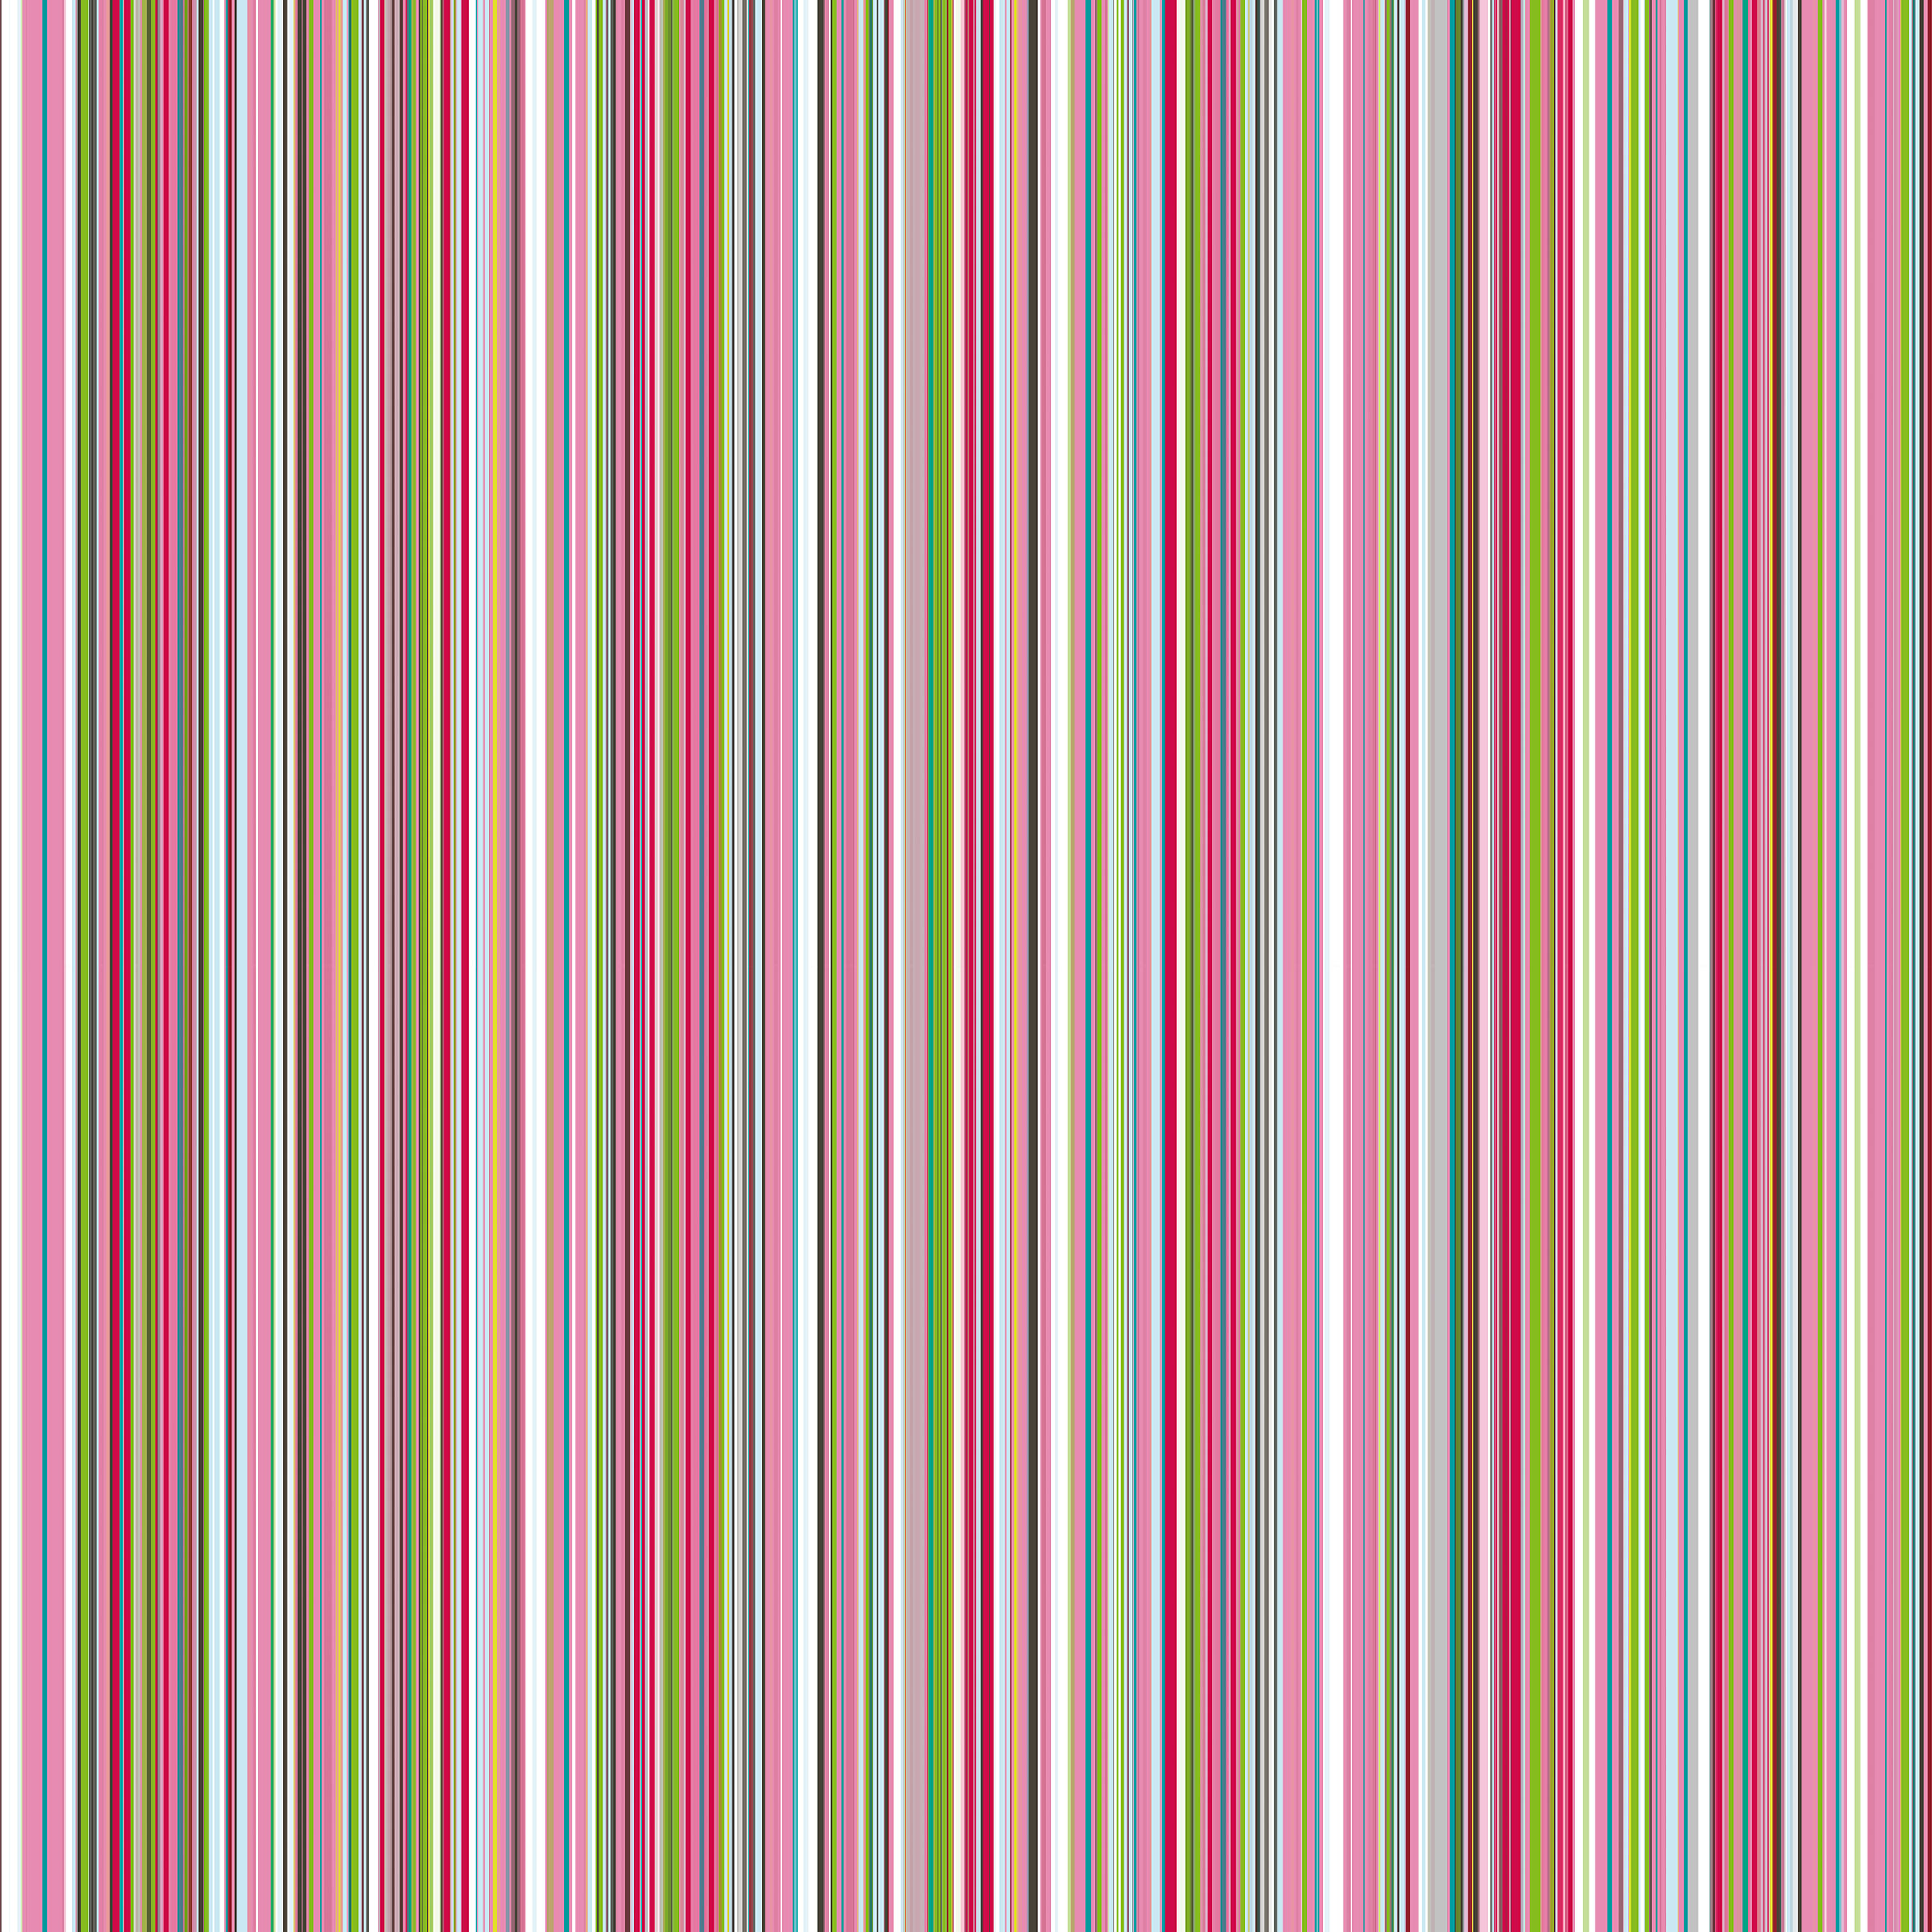 Herba, dynamic asymmetric multi-coloured stripe for upholstery and wallcovering.